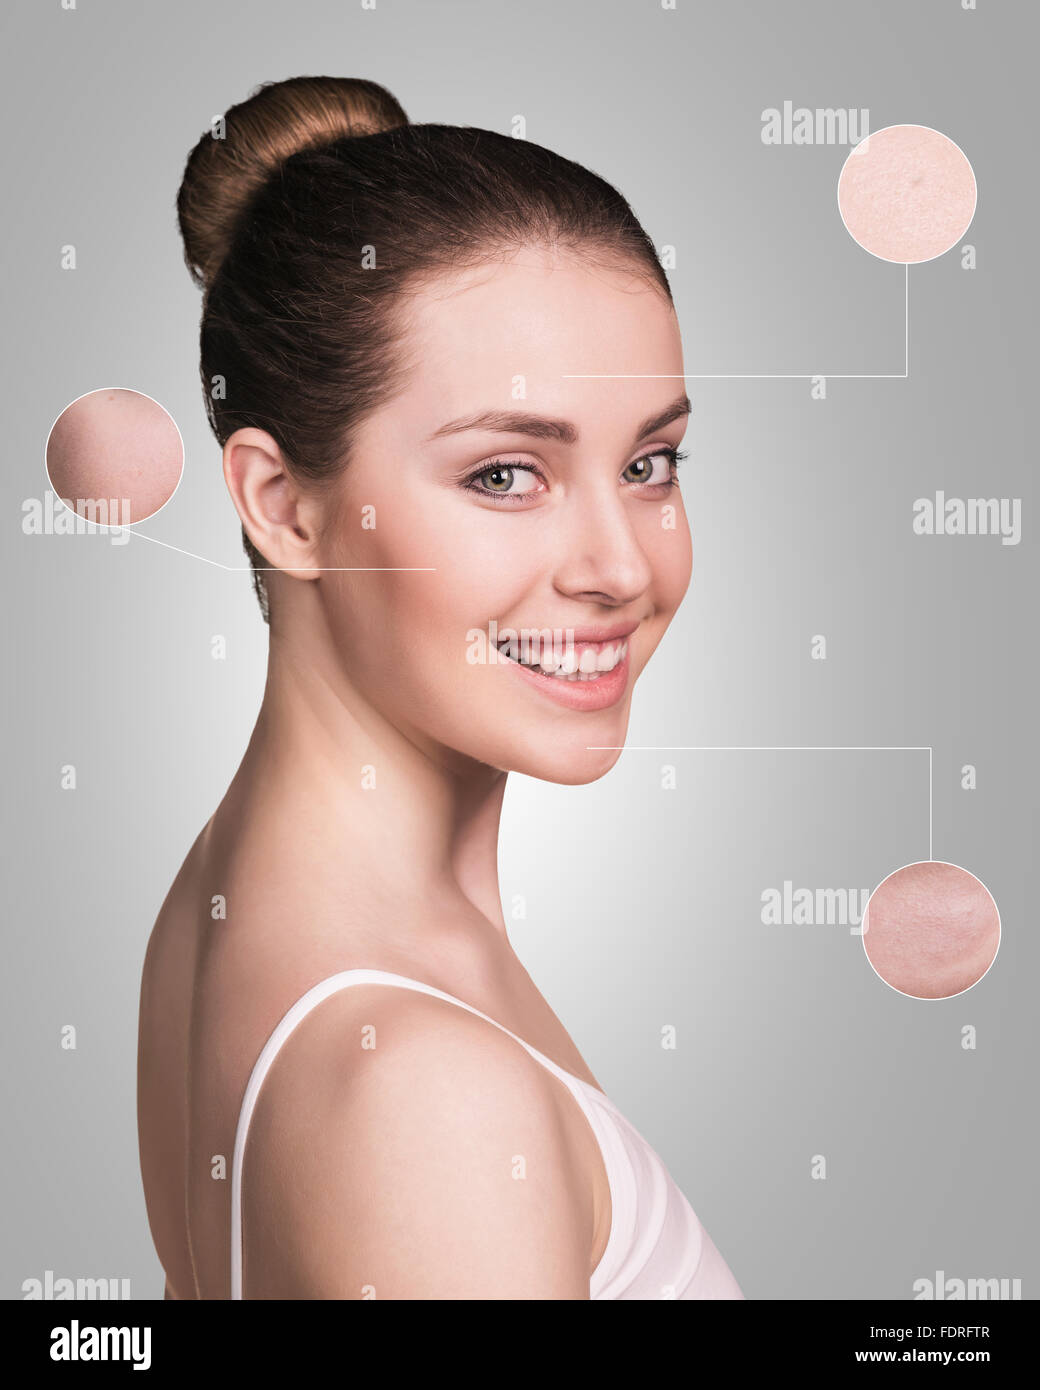 Female face with zoom circles. Stock Photo